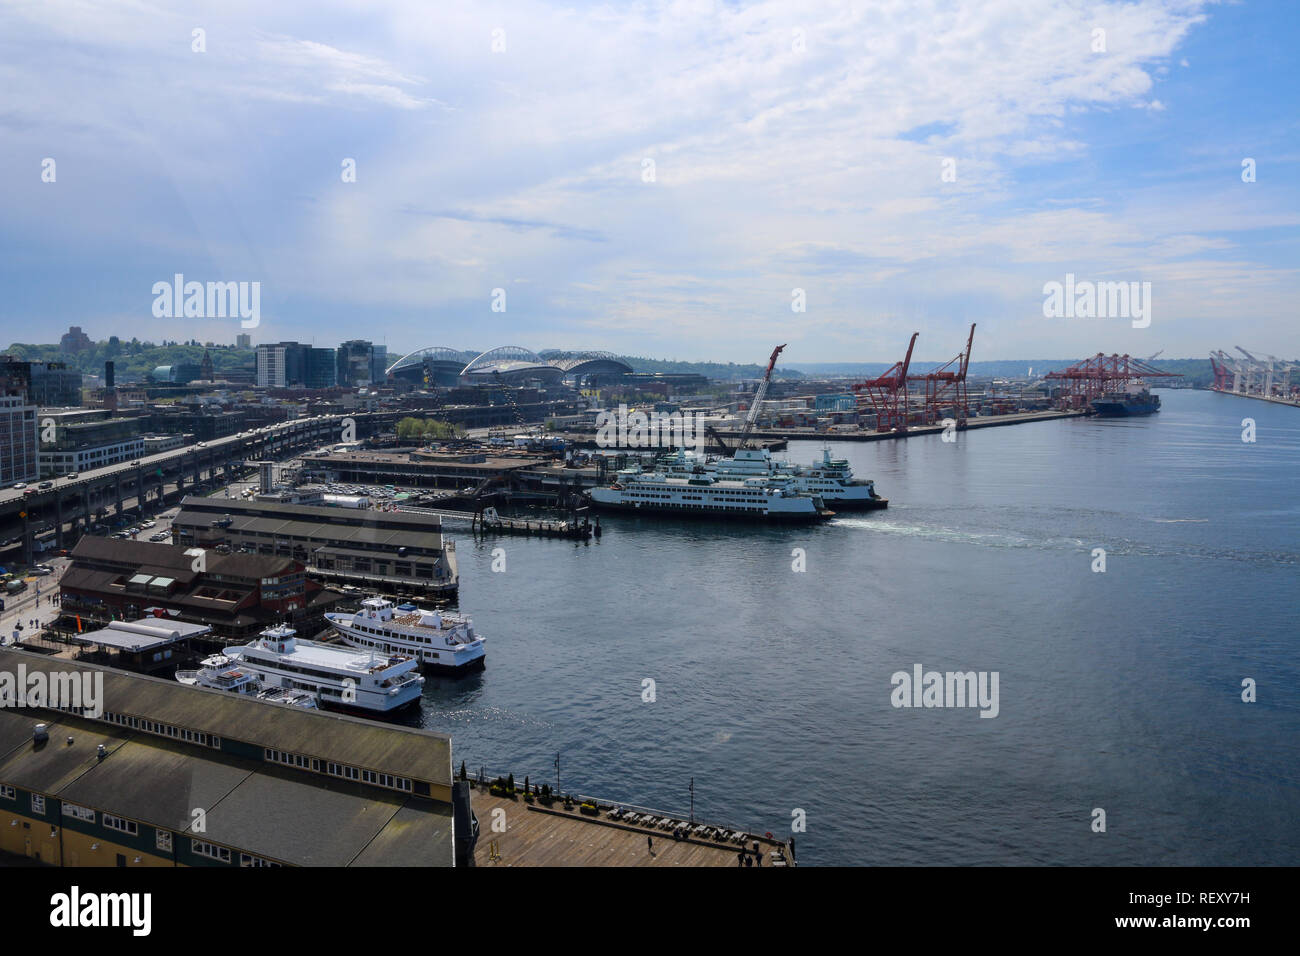 Seattle Puget Sound harbor marine landscape aerial view on a sunny partly cloudy day with cruise ships docked and rows of ports in the background, sta Stock Photo